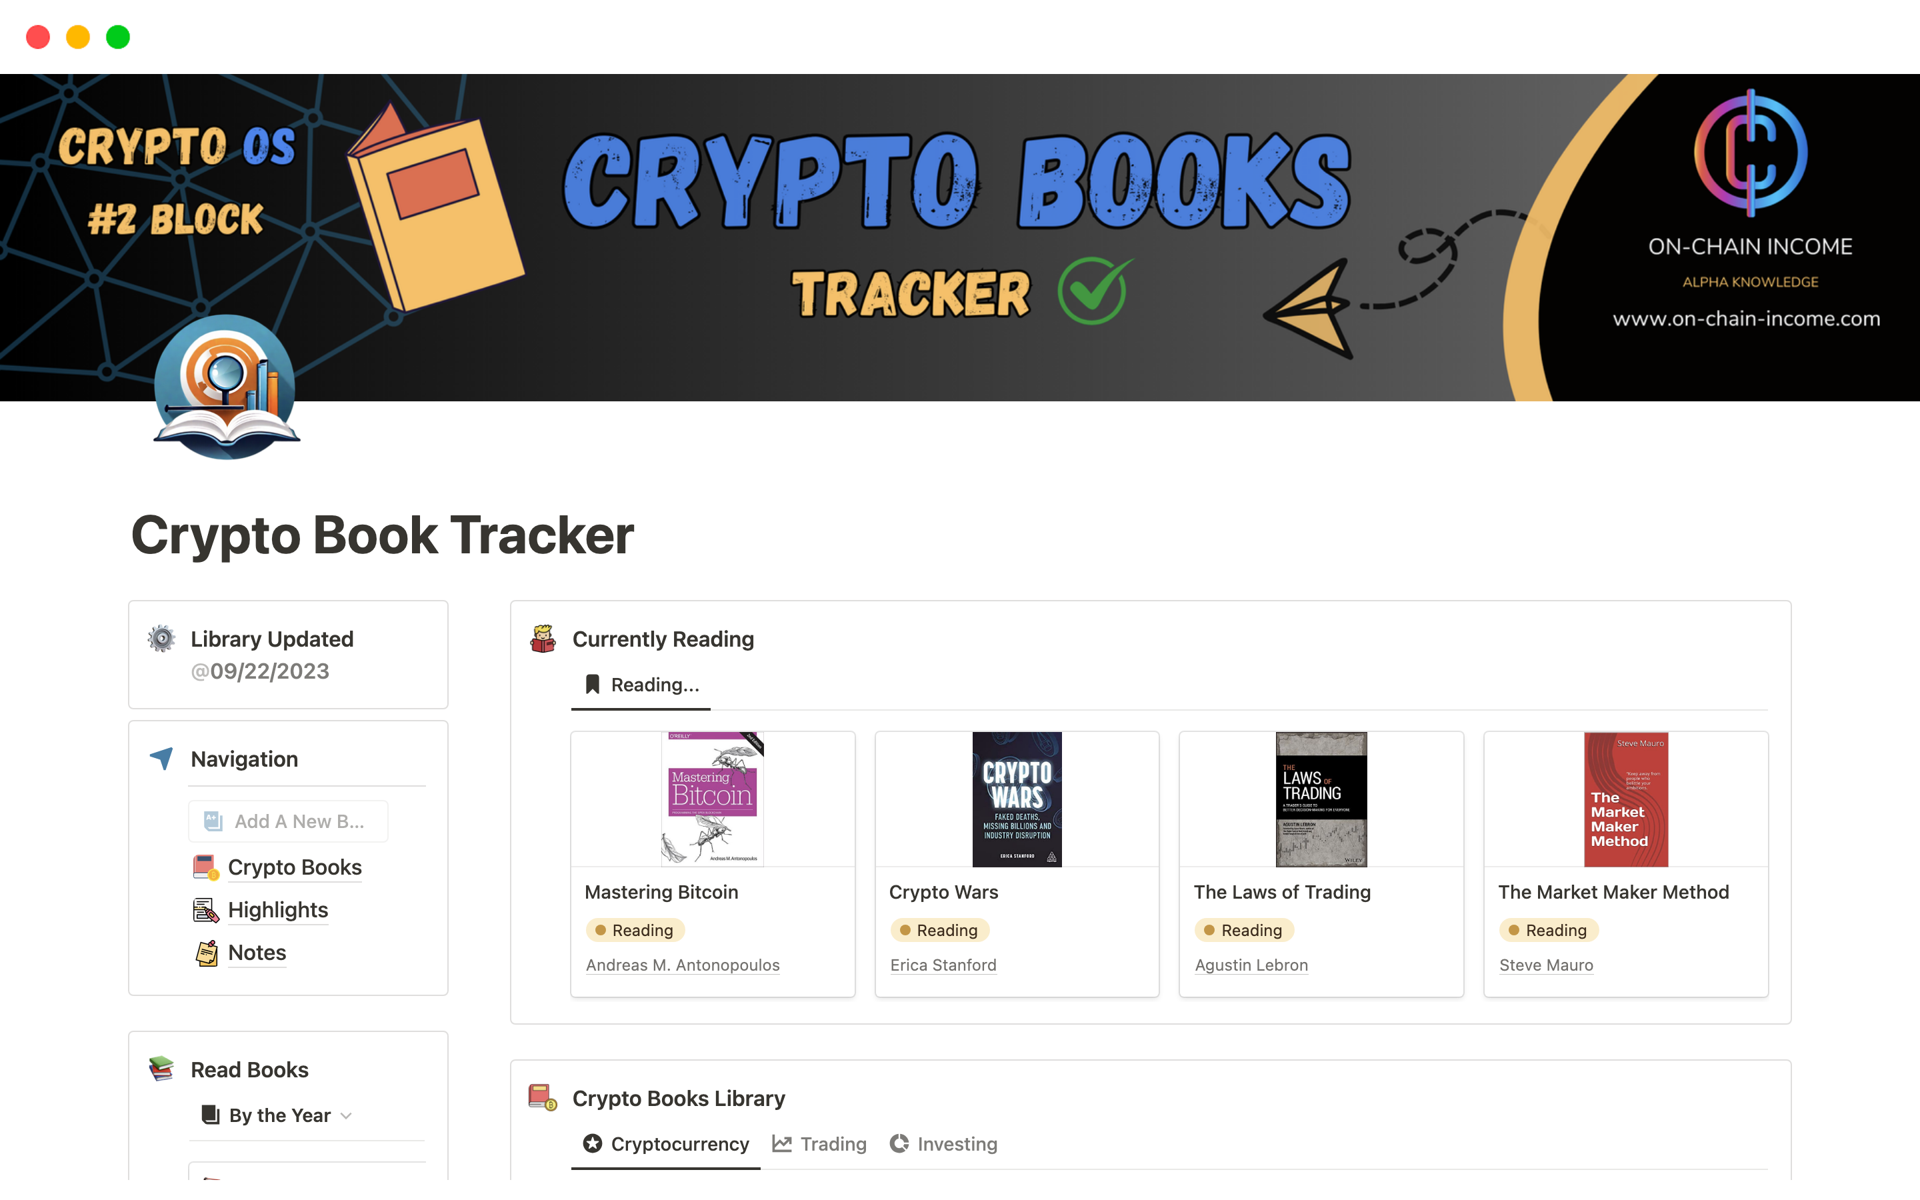 Keep Track Of What Crypto Book You Read

100% Free for a limited time! 